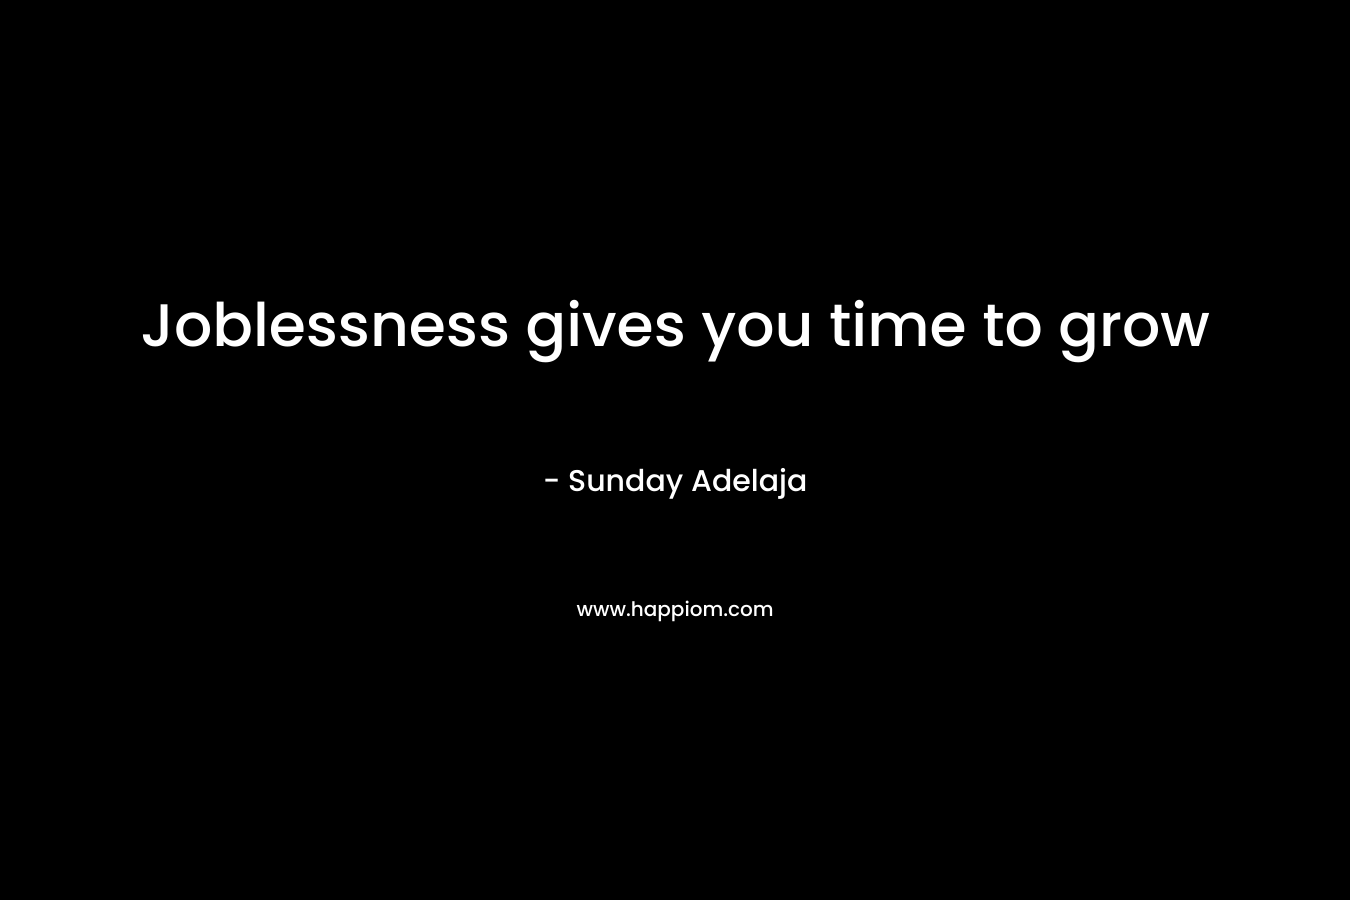 Joblessness gives you time to grow